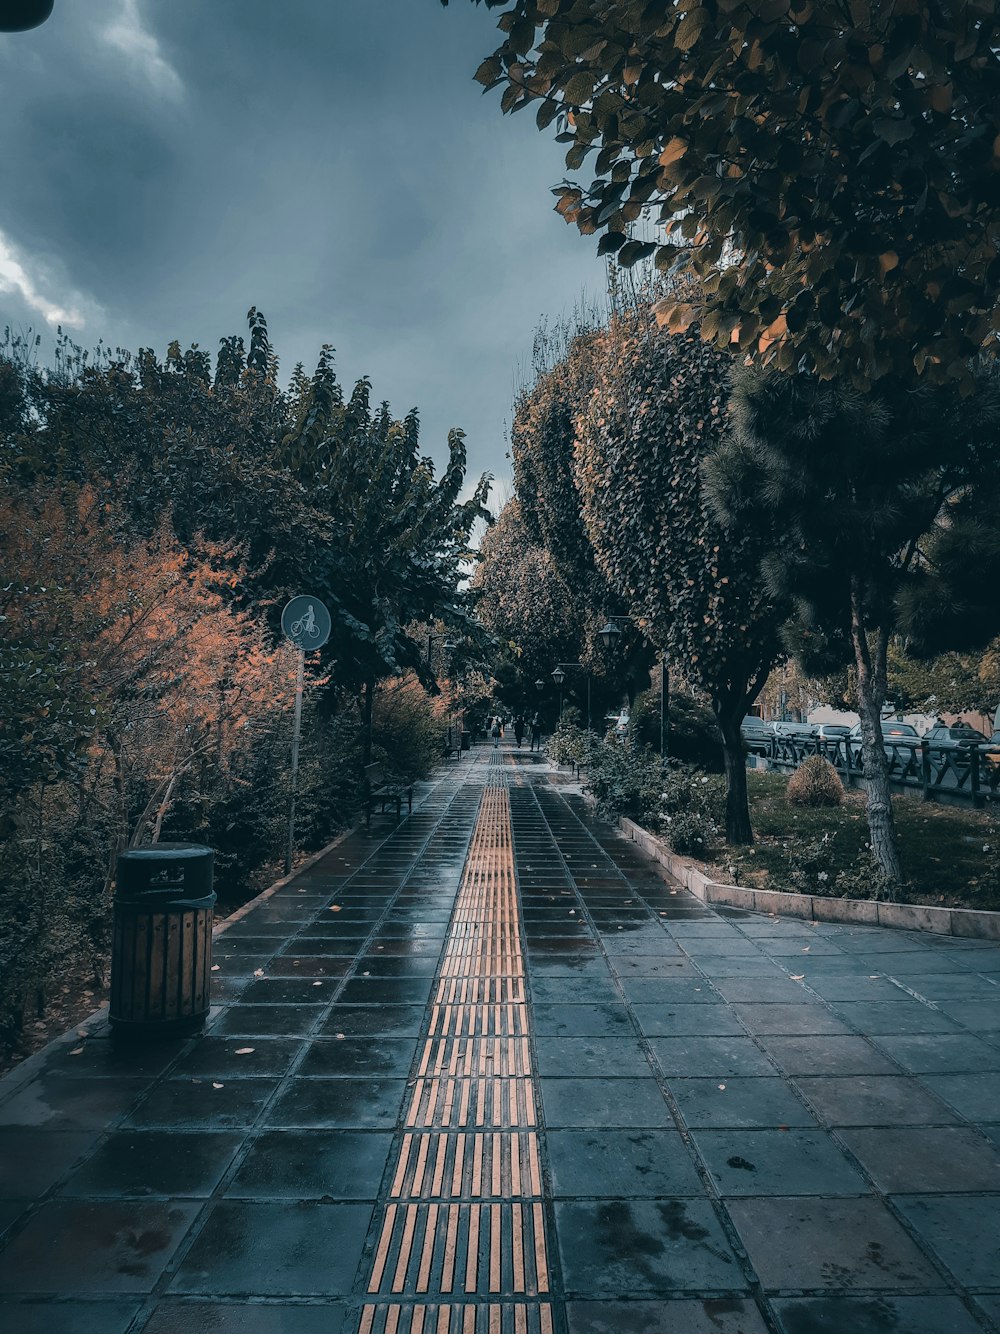 a street lined with lots of trees under a cloudy sky